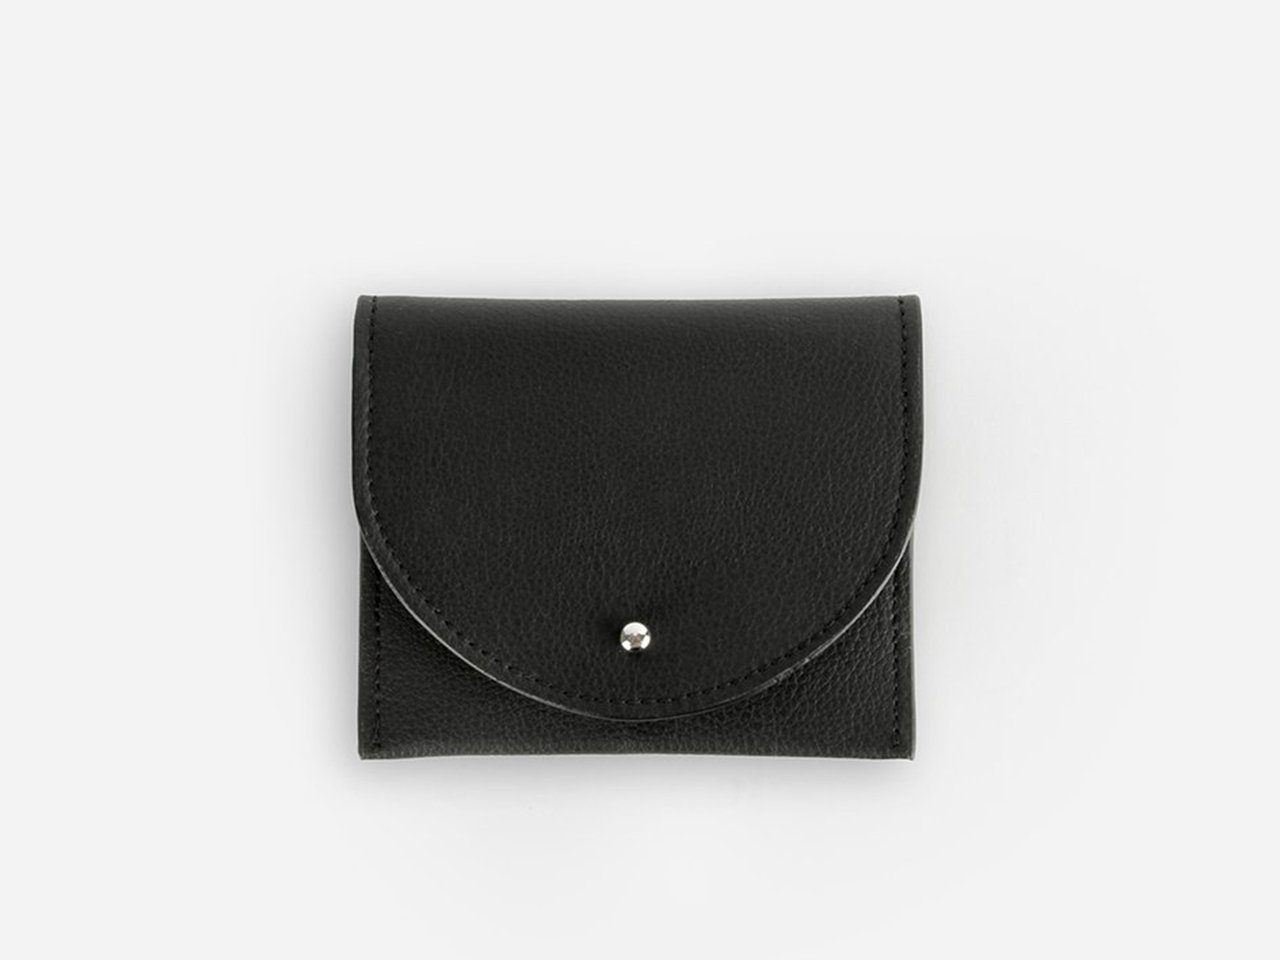 A black card holder made from cactus leather on a white background.